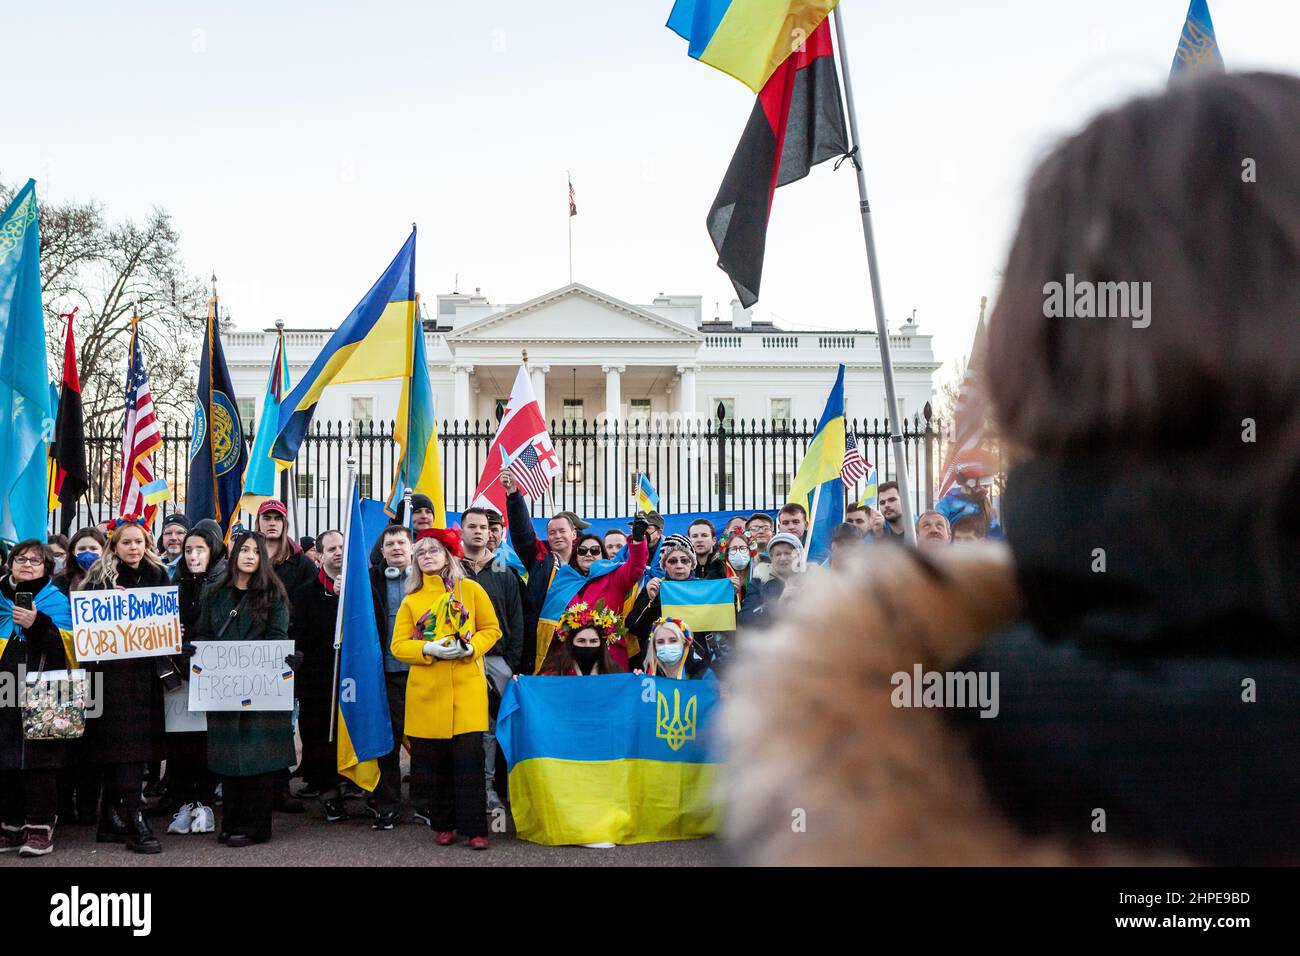 Washington, DC, USA, 20 February, 2022.  Pictured: Protesters rally in front of the White House during a solidarity event for Ukraine.  Thousands attended the event in support of Ukrainian independence, sovereignty, and territorial integrity as Russian President Vladimir Putin threatens invasion with troops mobilized at the border between the two countries.  The event was sponsored by Razom, a Ukrainian advocacy organization, and included a vigil for the Heavenly Hundred / Nebesna Sotnia (those killed during the 2014 Revolution of Dignity).  Credit: Allison Bailey / Alamy Live News Stock Photo